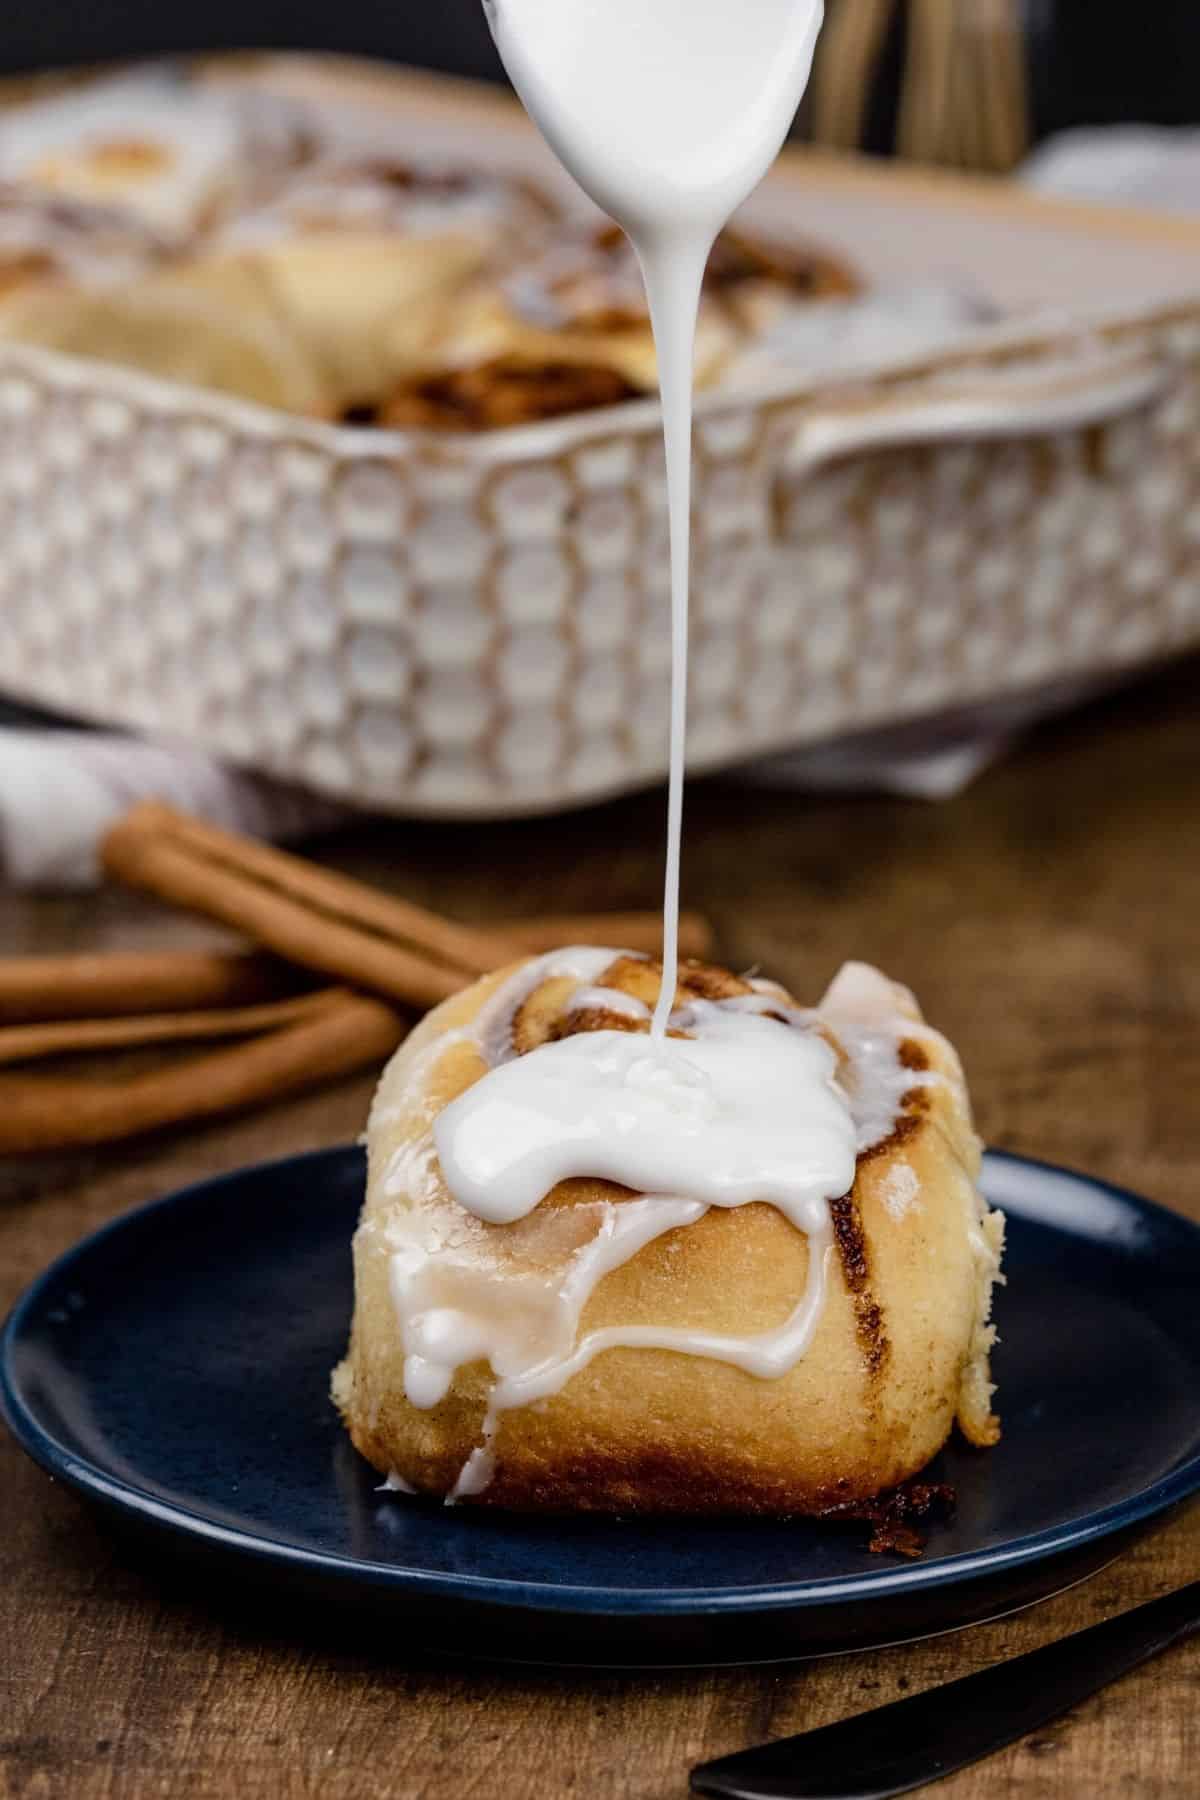 a single cinnamon roll is on a dark blue plate in front of a dish filled with the other rolls. a spoon is drizzling thick white icing on top of the roll.